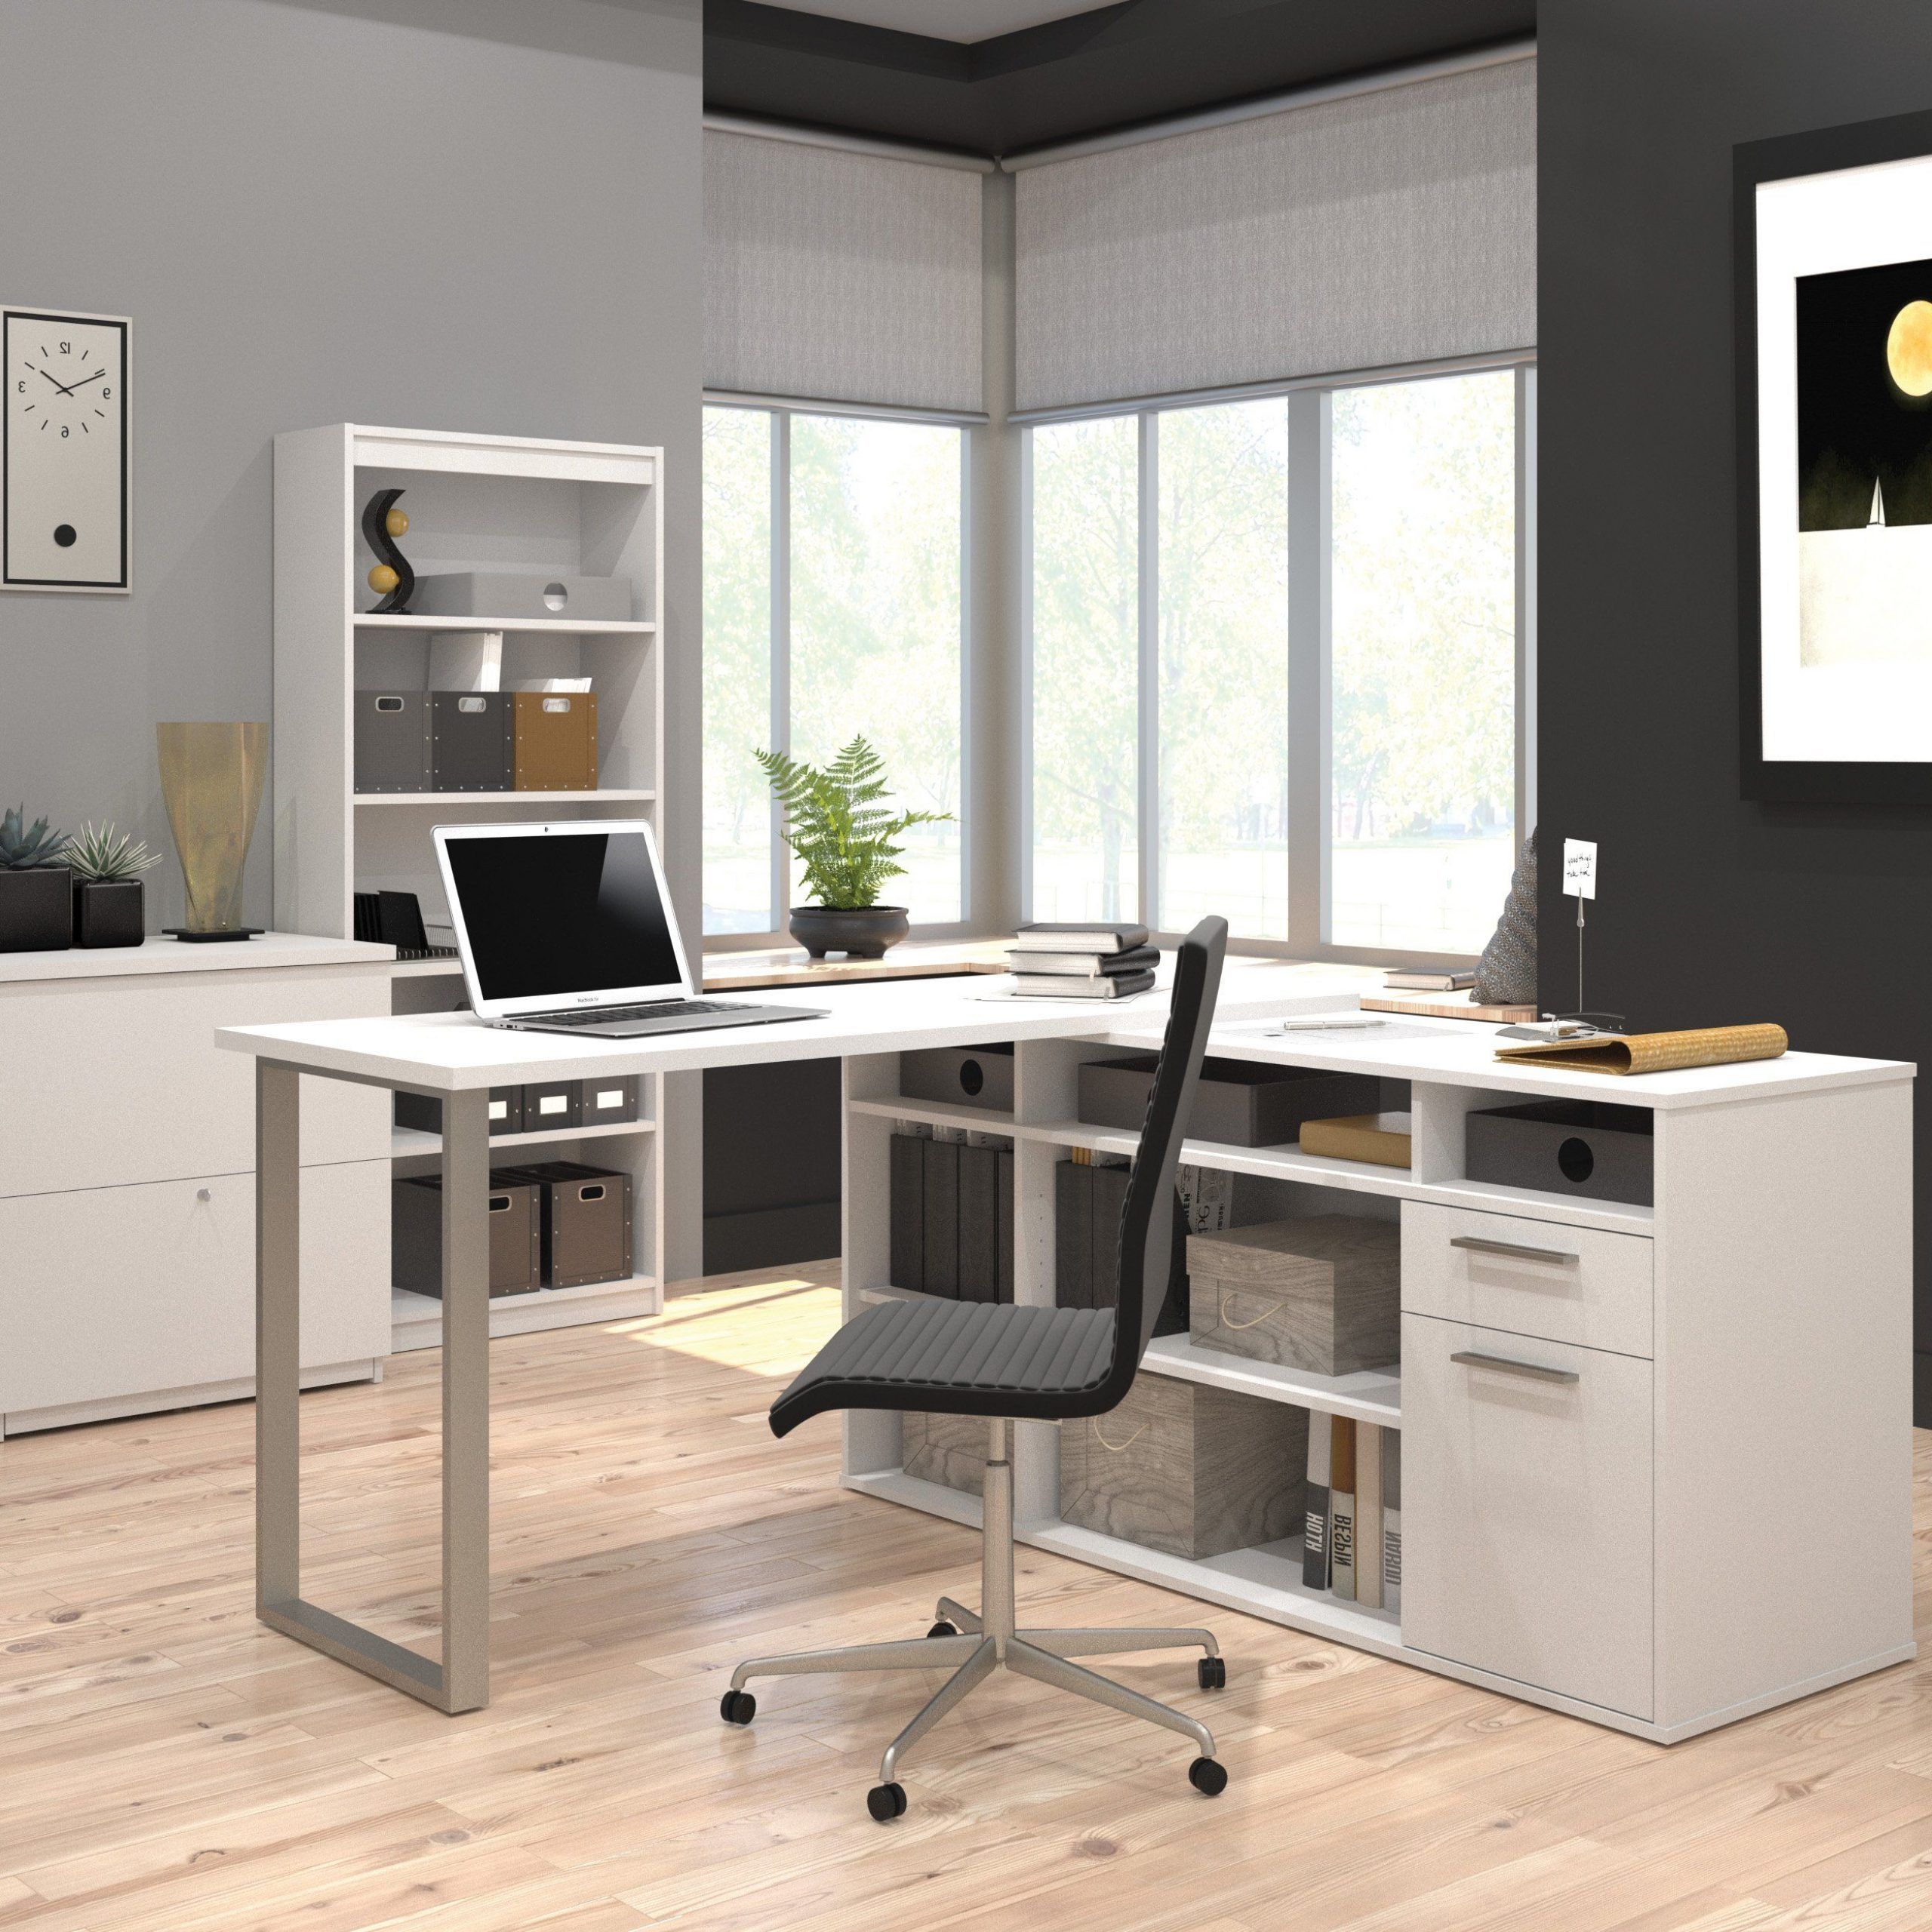 Set Of 3: L Shaped Desk, Lateral File, & Bookcase In White Finish Intended For 2019 White Finish Office Study Work Desks (View 4 of 15)